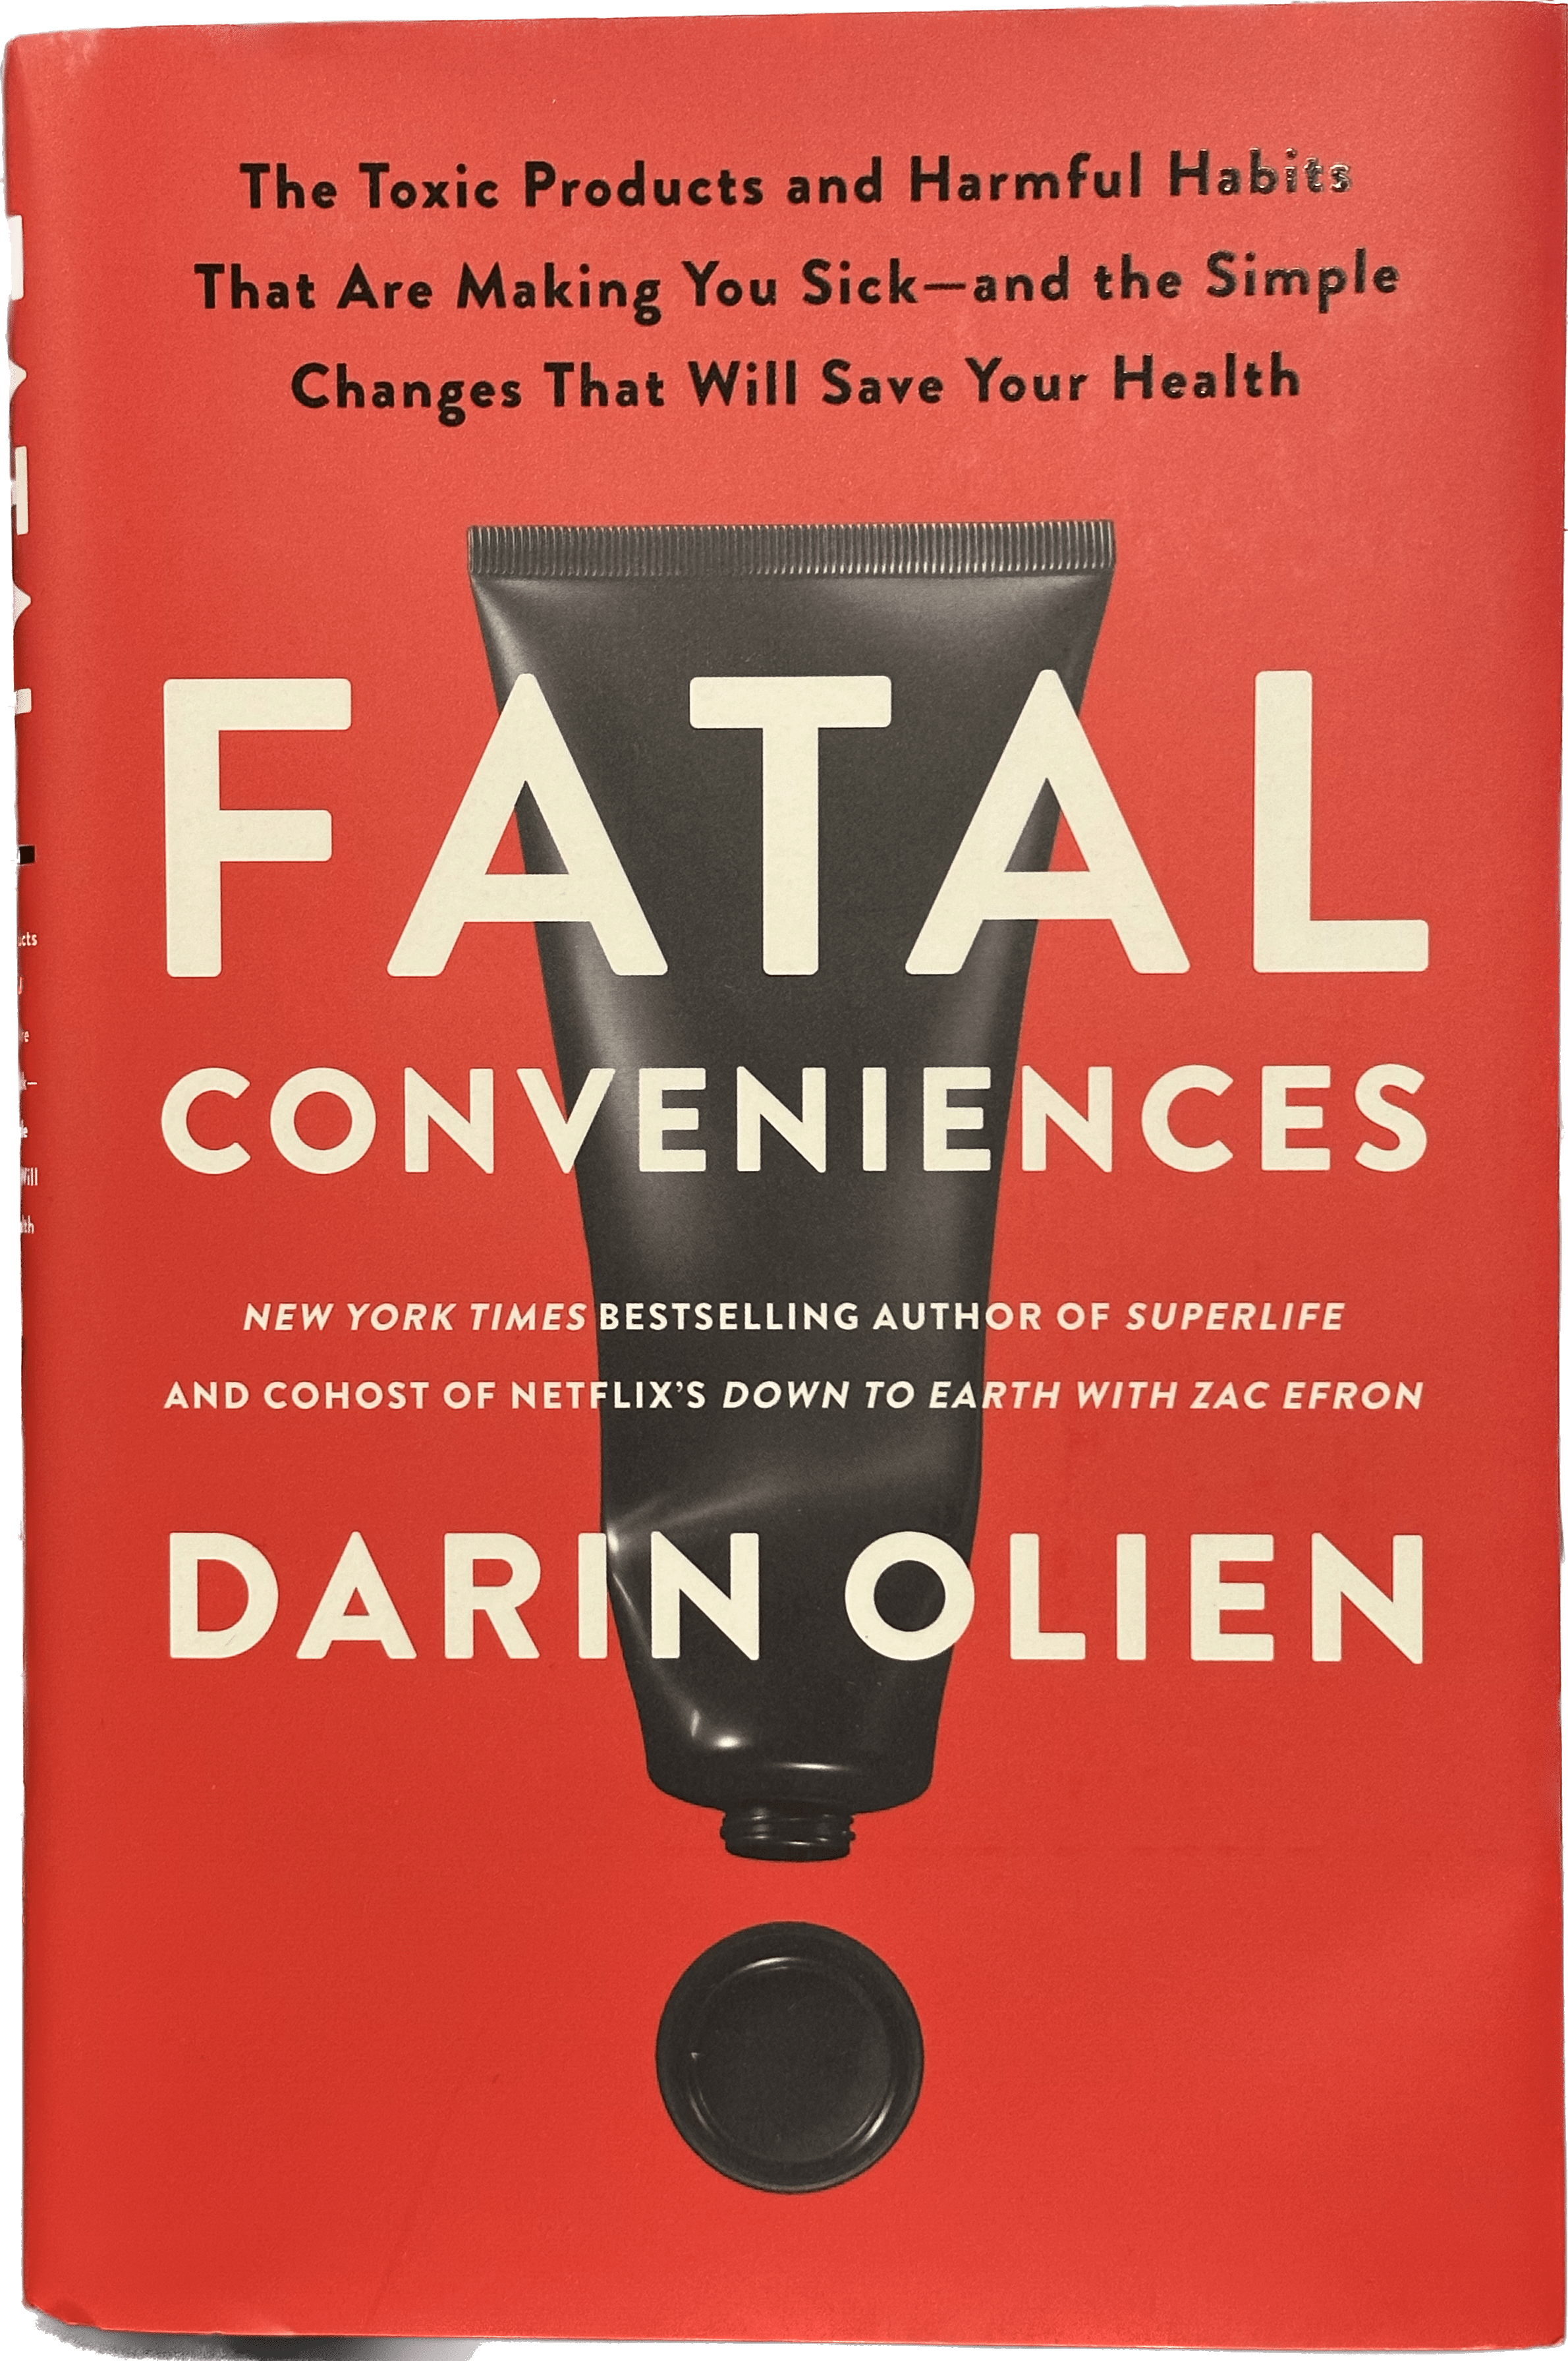 Therasage All Therasage BOOK - Fatal Conveniences by Darin Olien